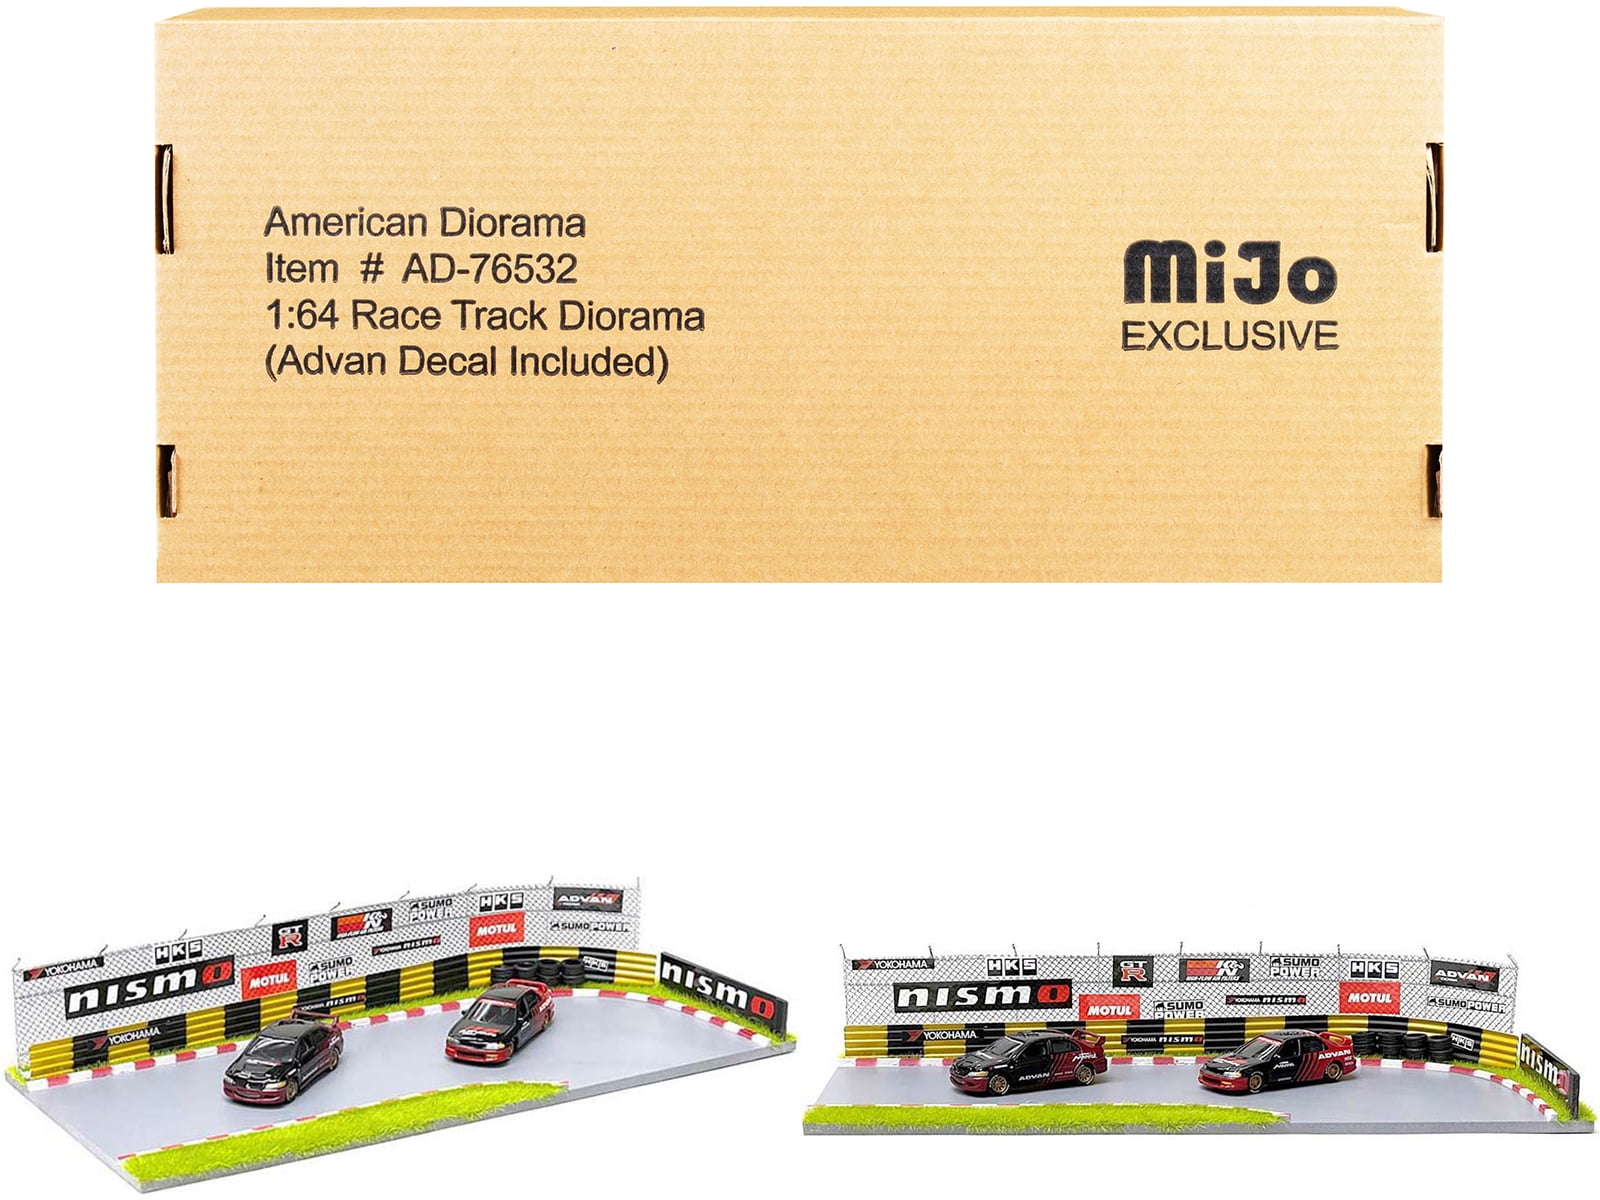 Race Track Advan Diorama with Decals for 1/64 Scale Models by